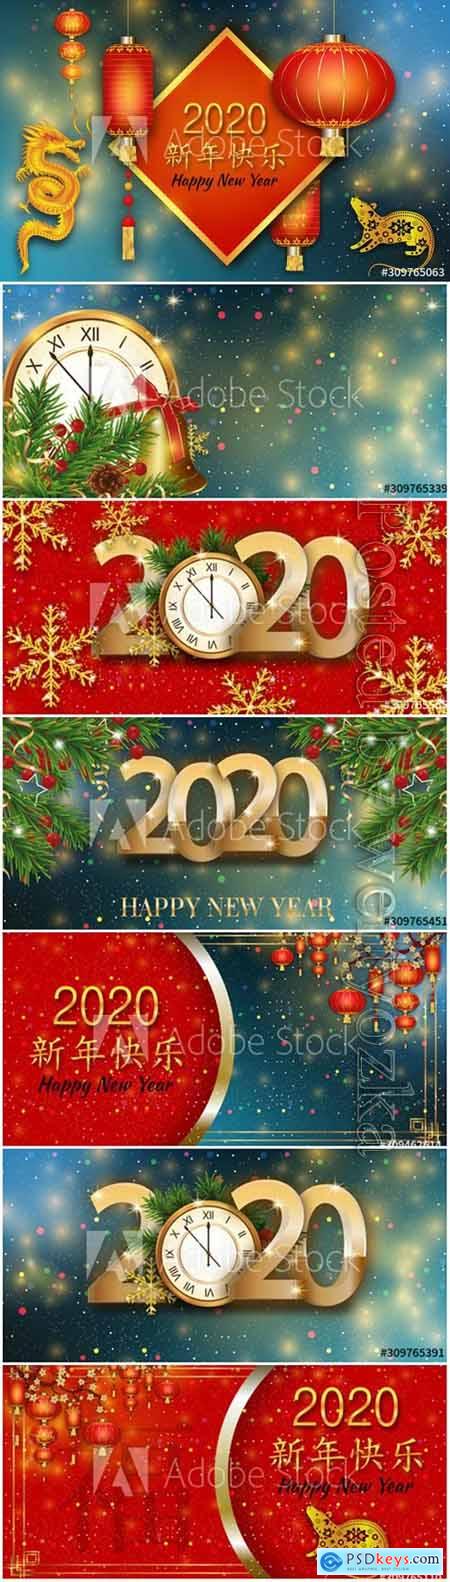 Happy New Year 2020 vector background